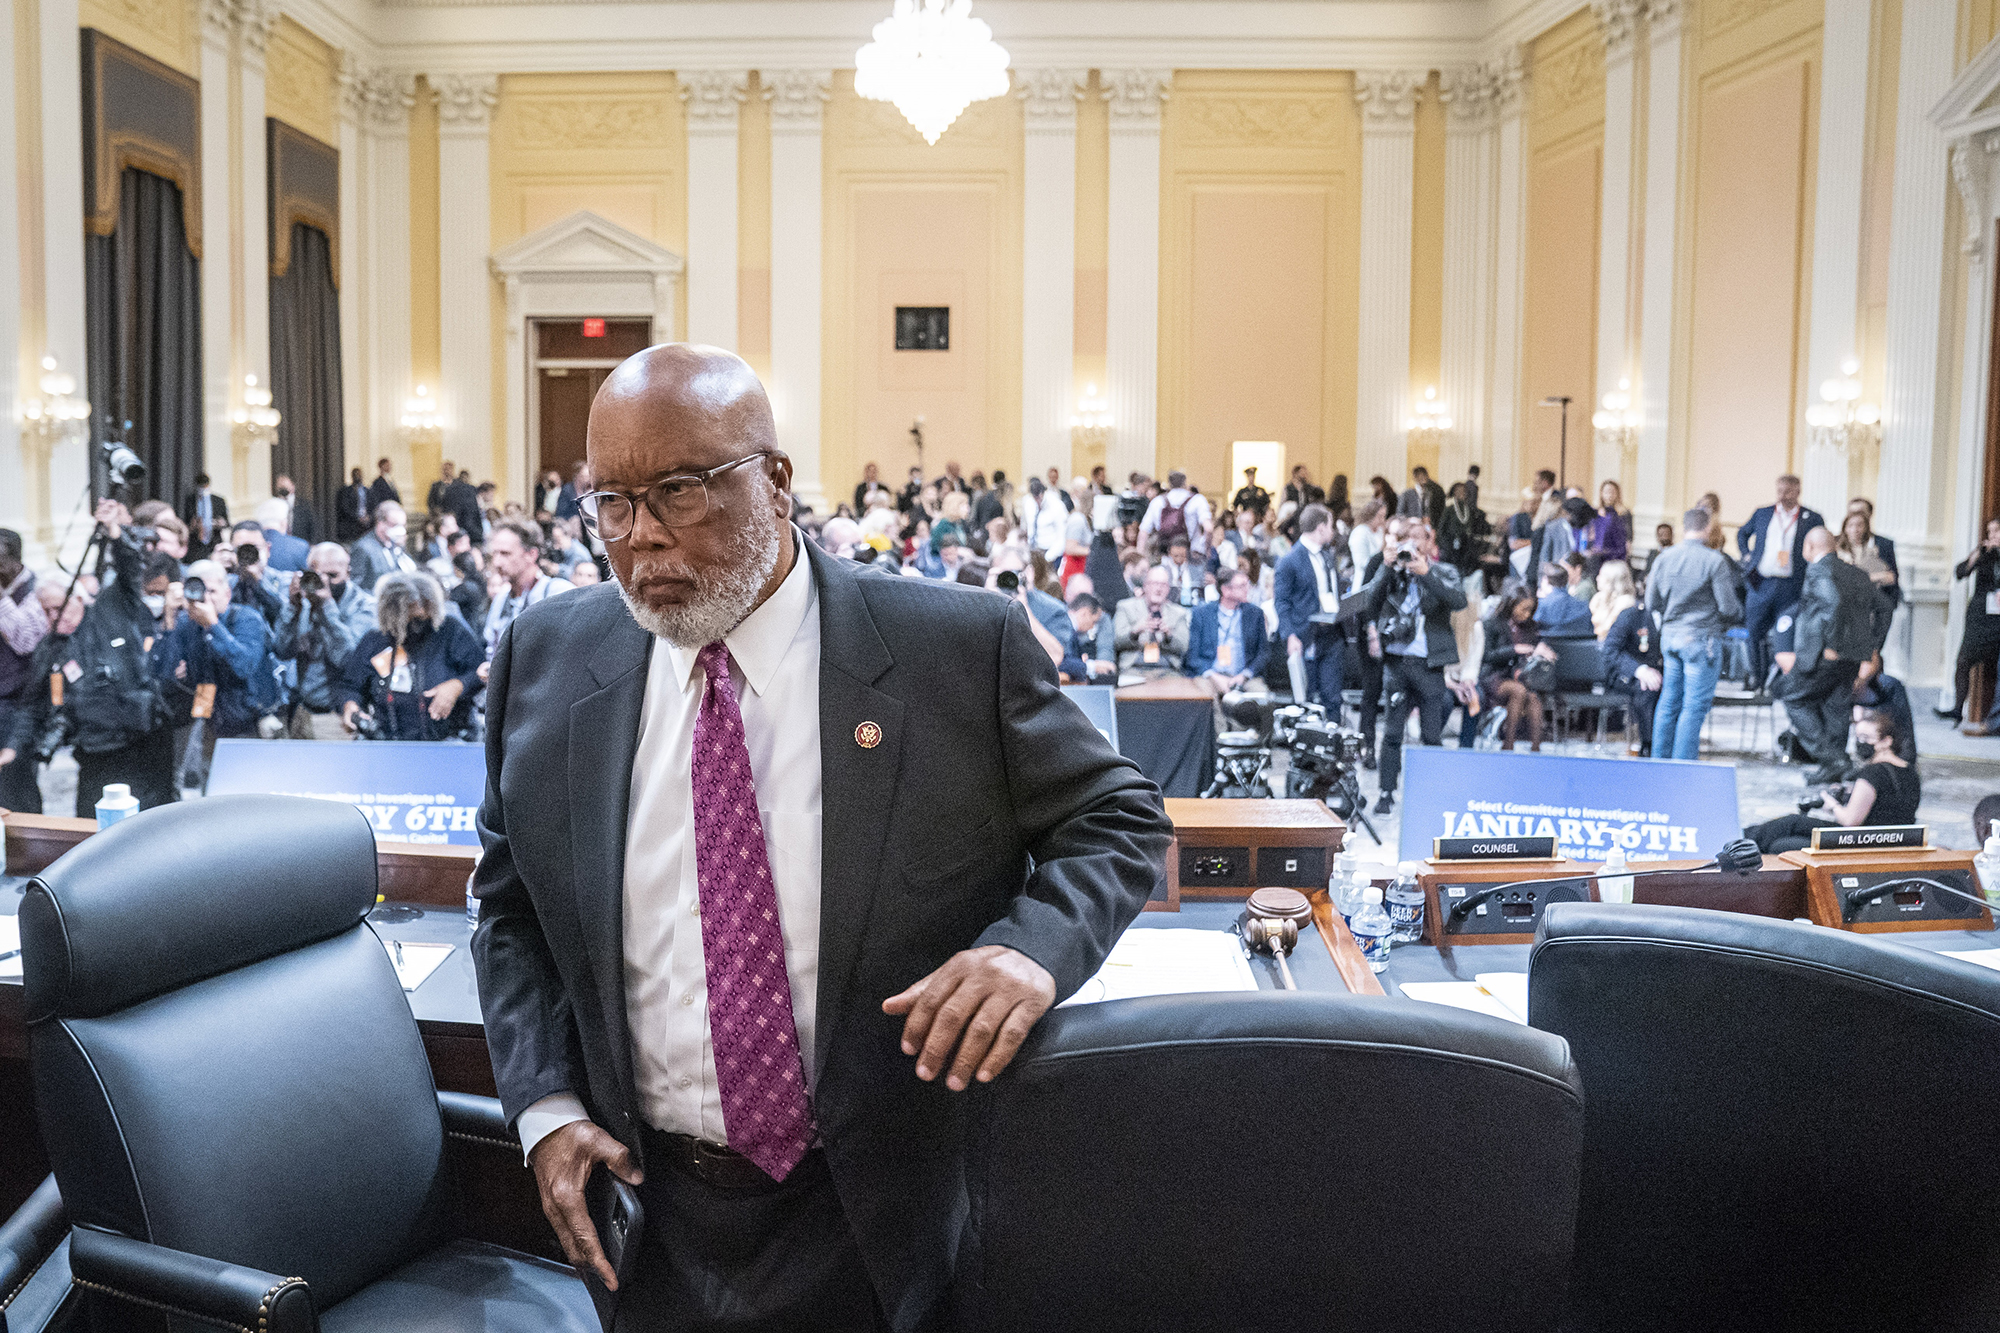 PHOTO: Rep. Bennie Thompson, Chair of the House Select Committee to Investigate the January 6th Attack on the U.S. Capitol, stands to depart during a break in a hearing at the Cannon House Office Building in Washington, Oct. 13, 2022.